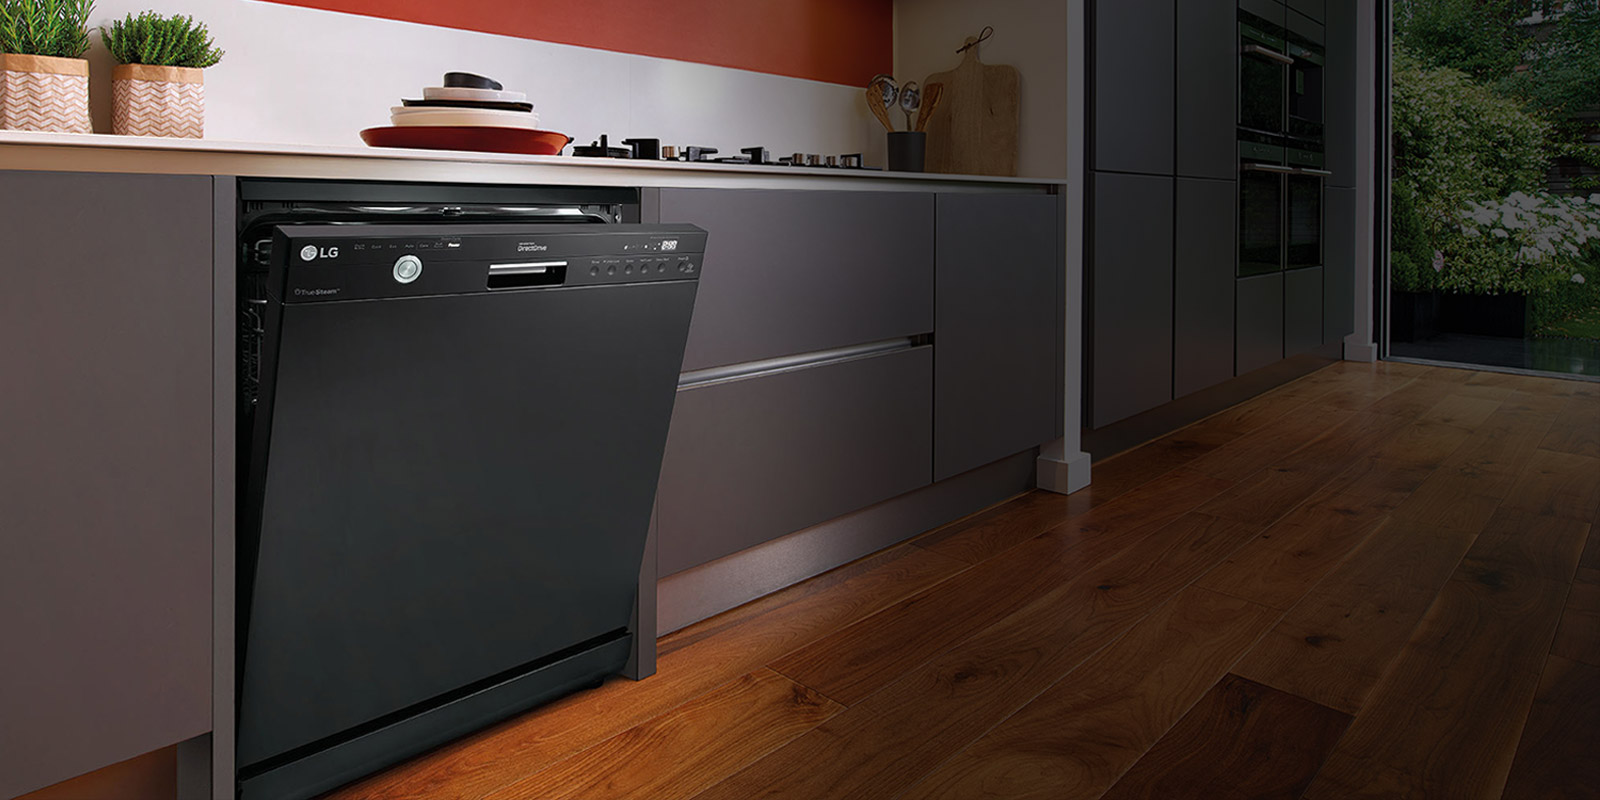 lg dishwasher features